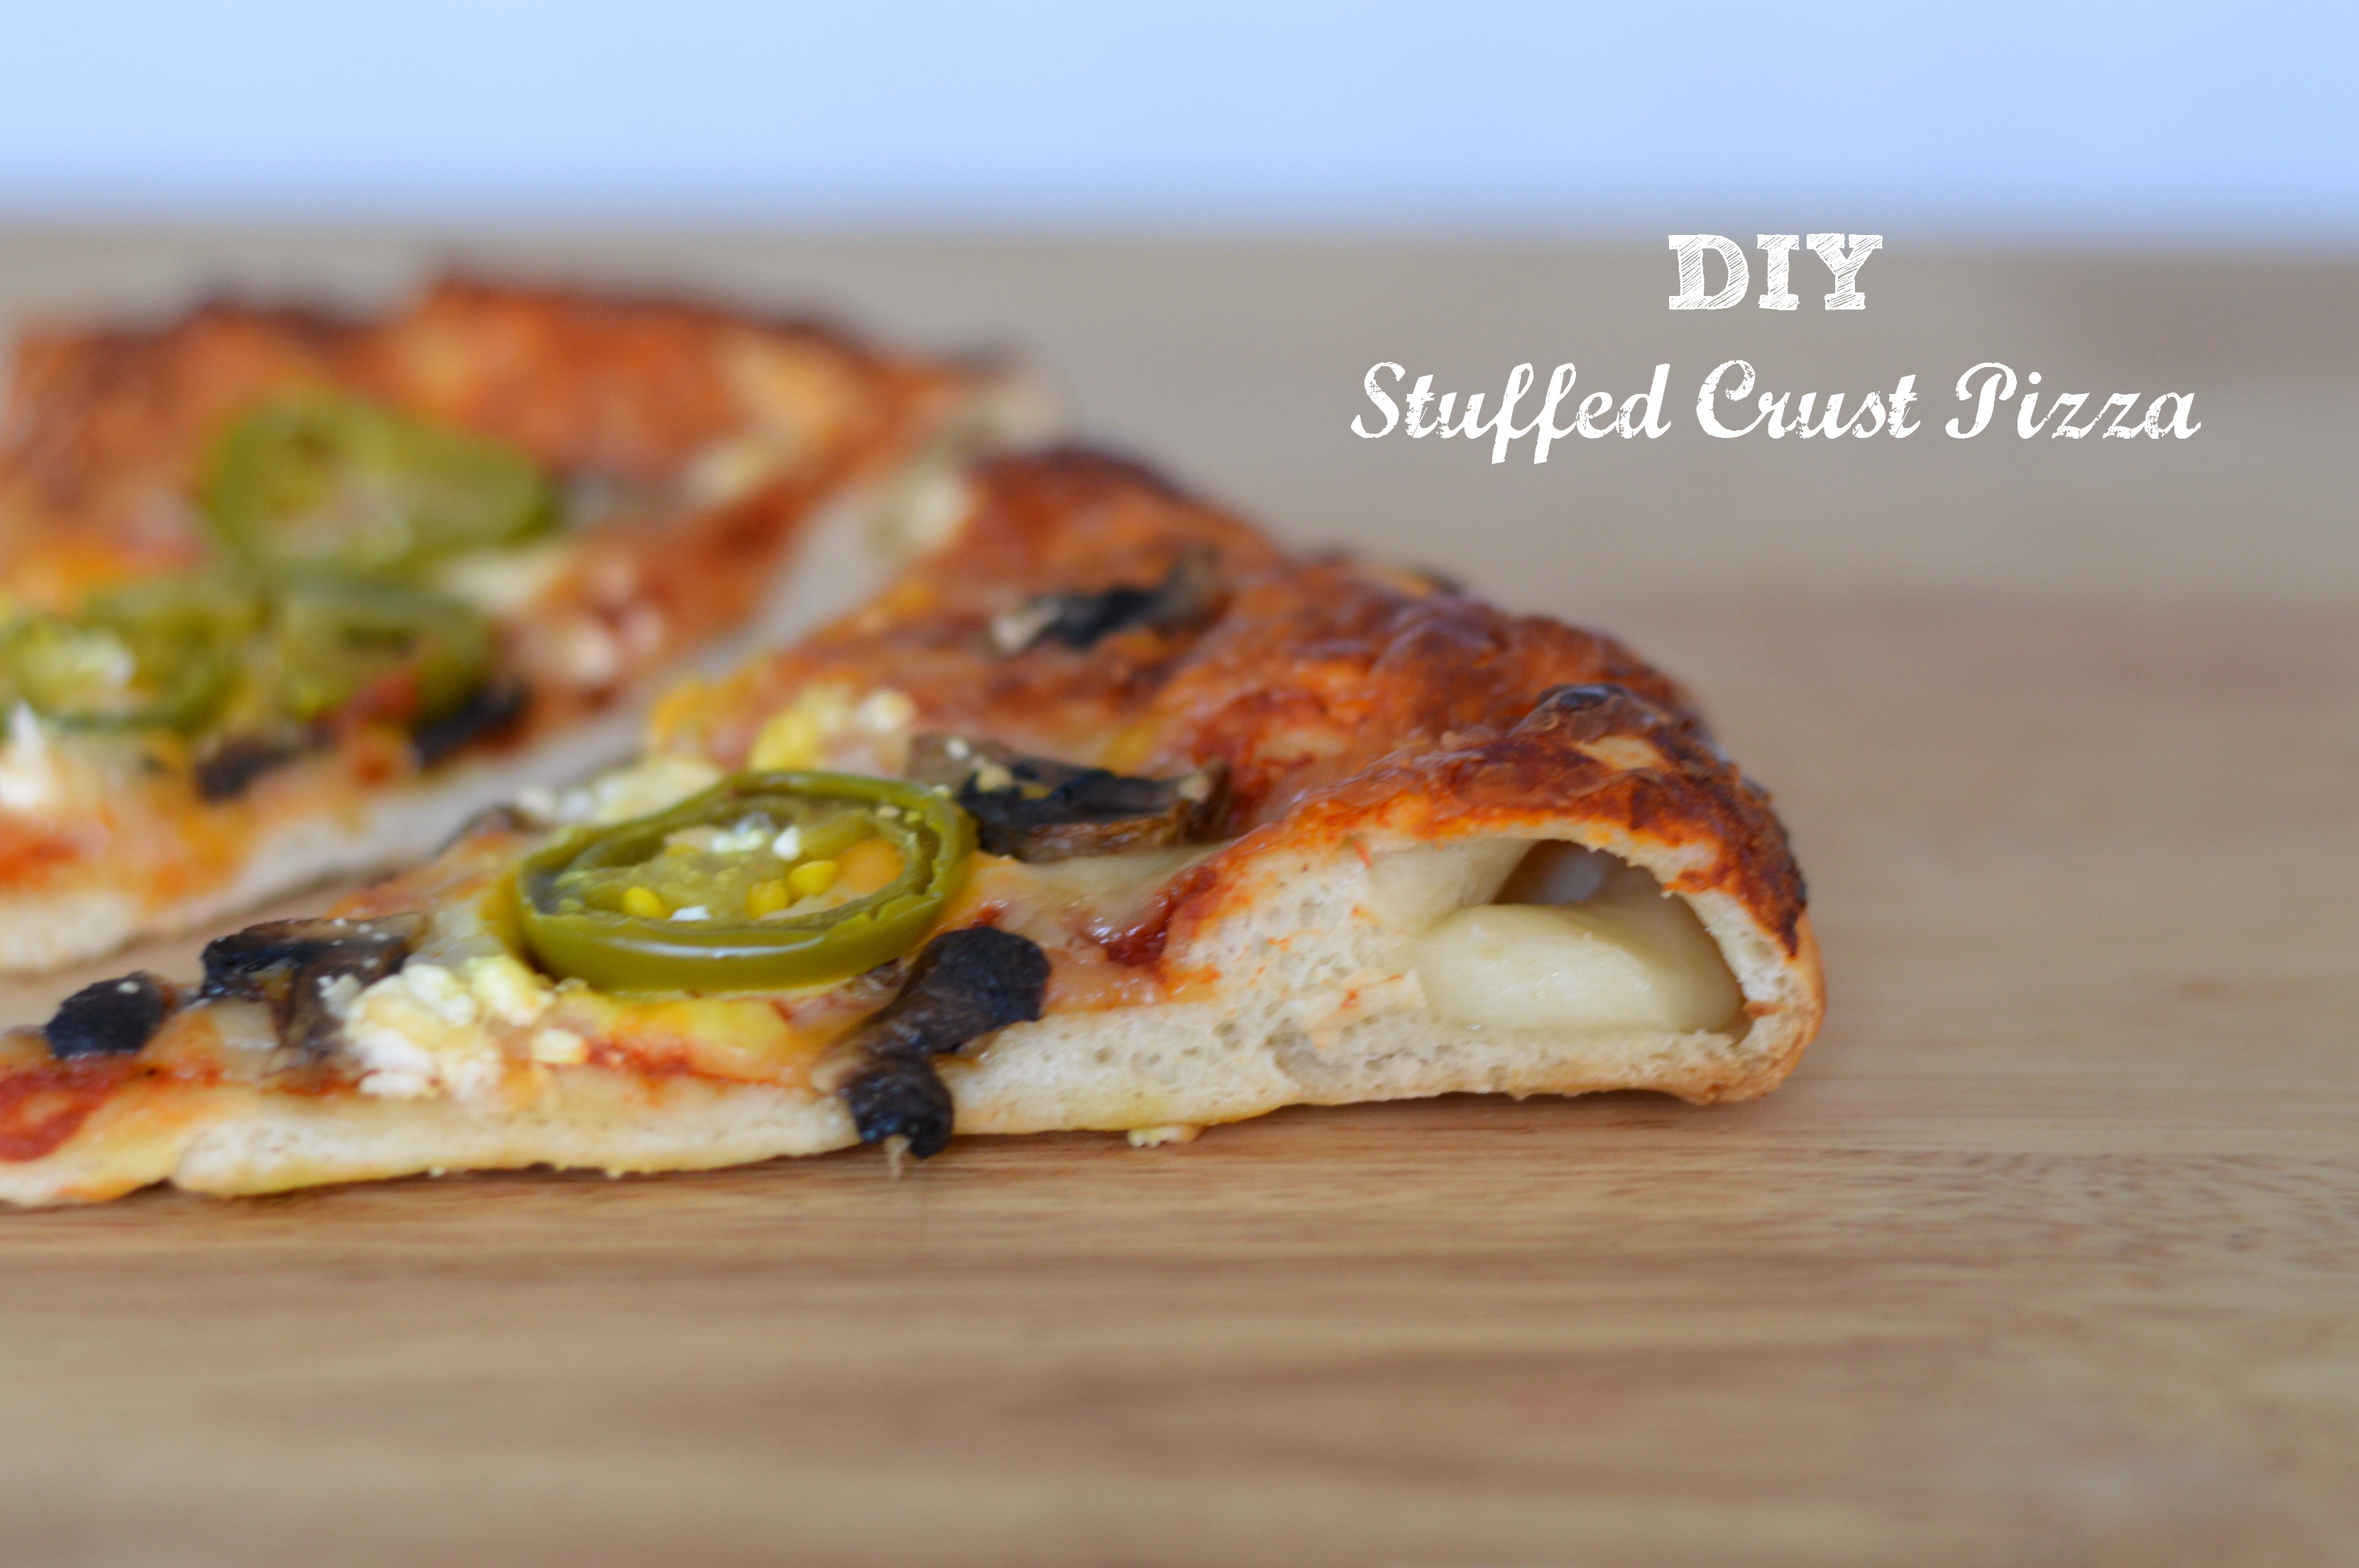 DIY Stuffed Crust Pizza is better than takeout and healthier too